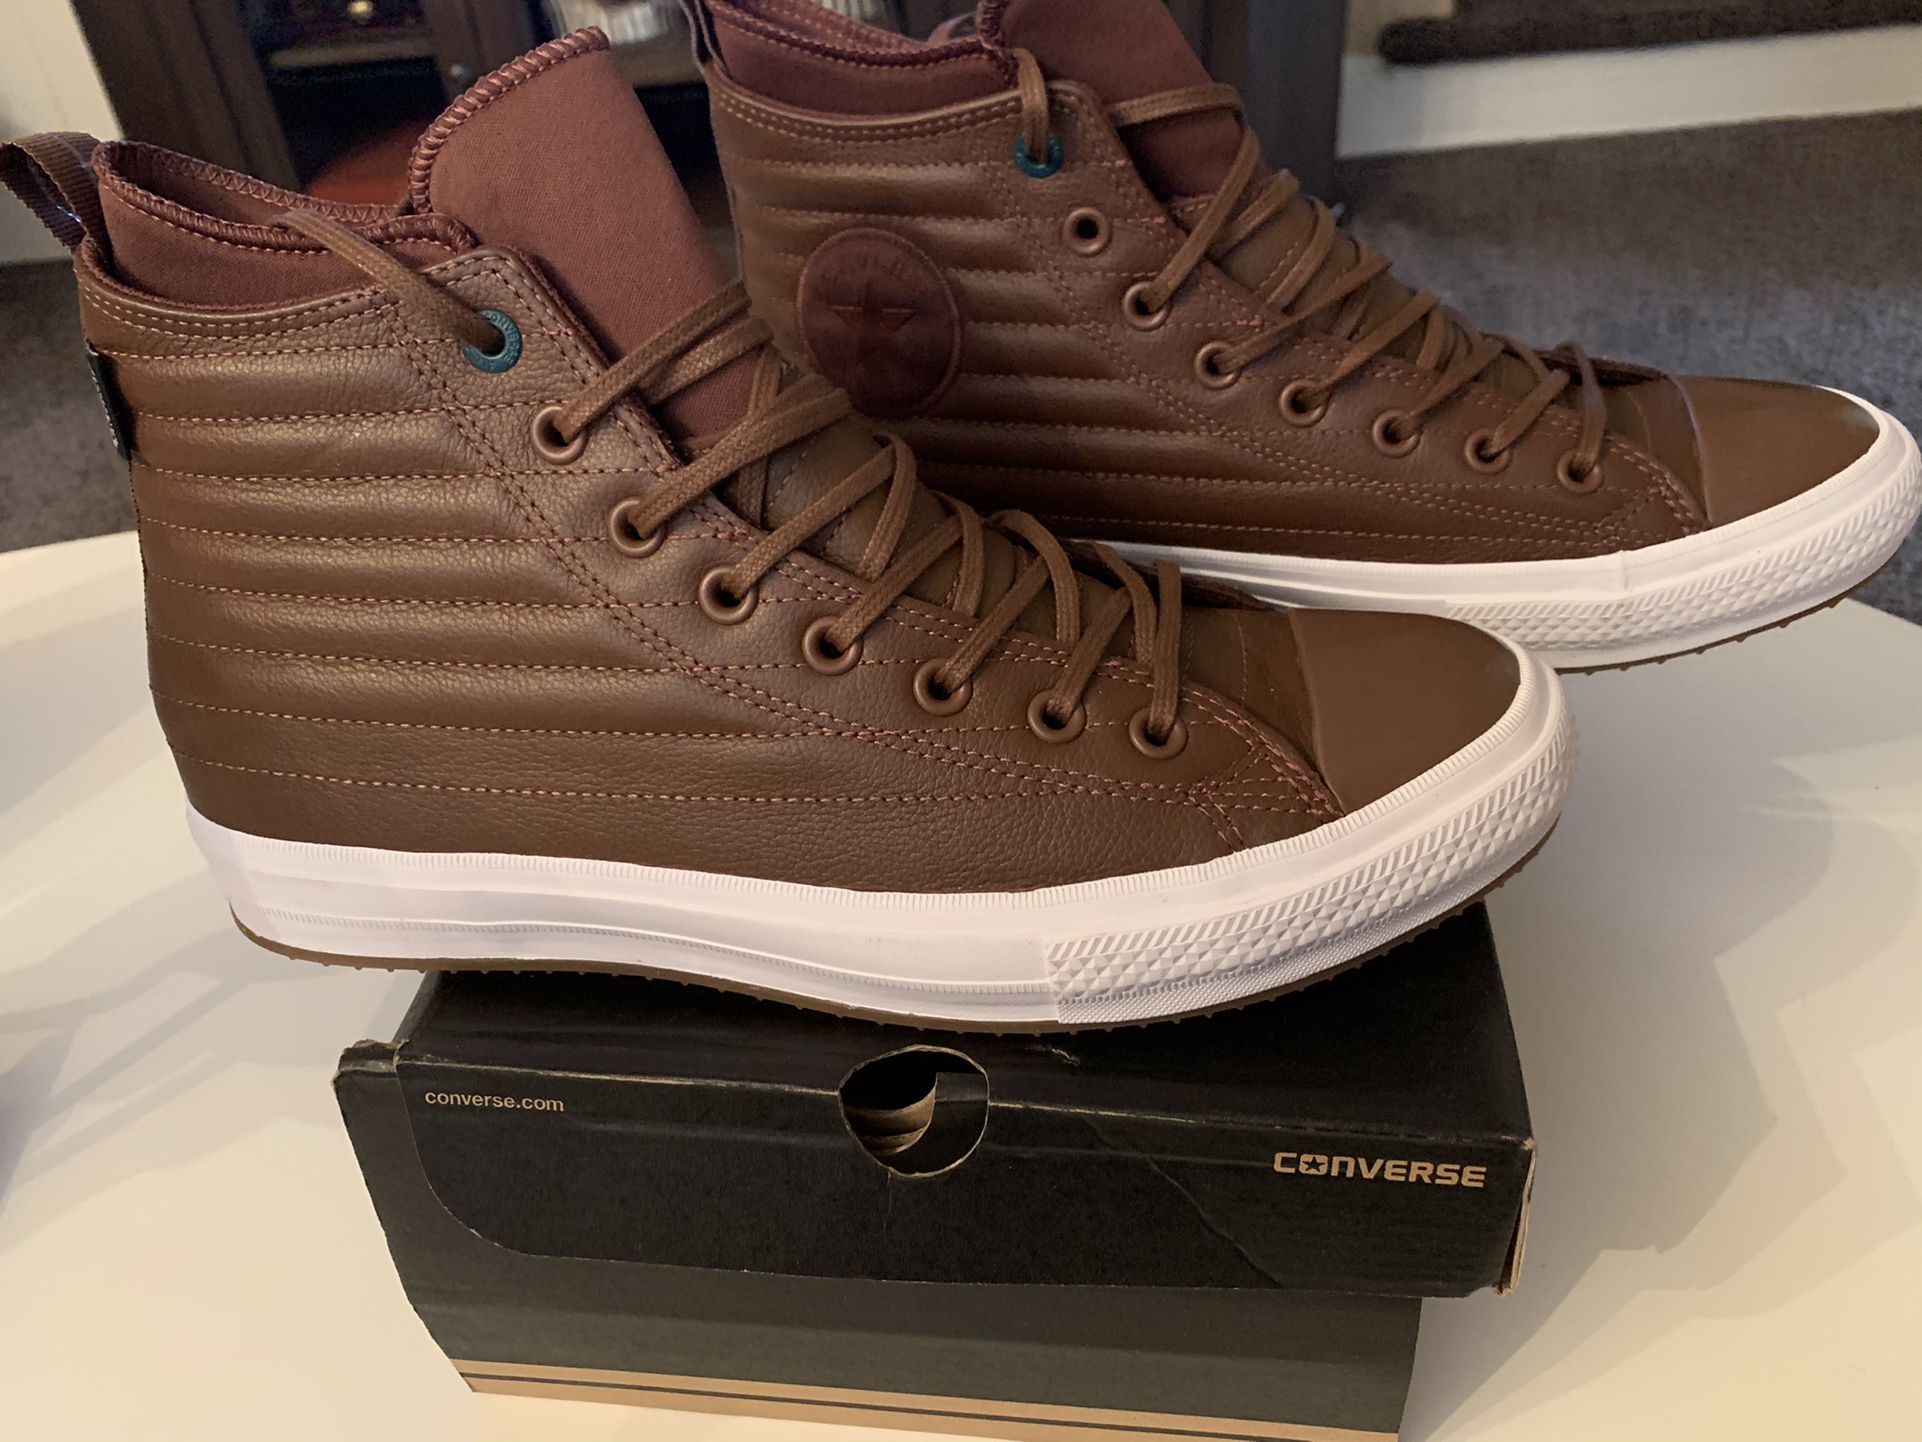 Converse boots brand new size 10